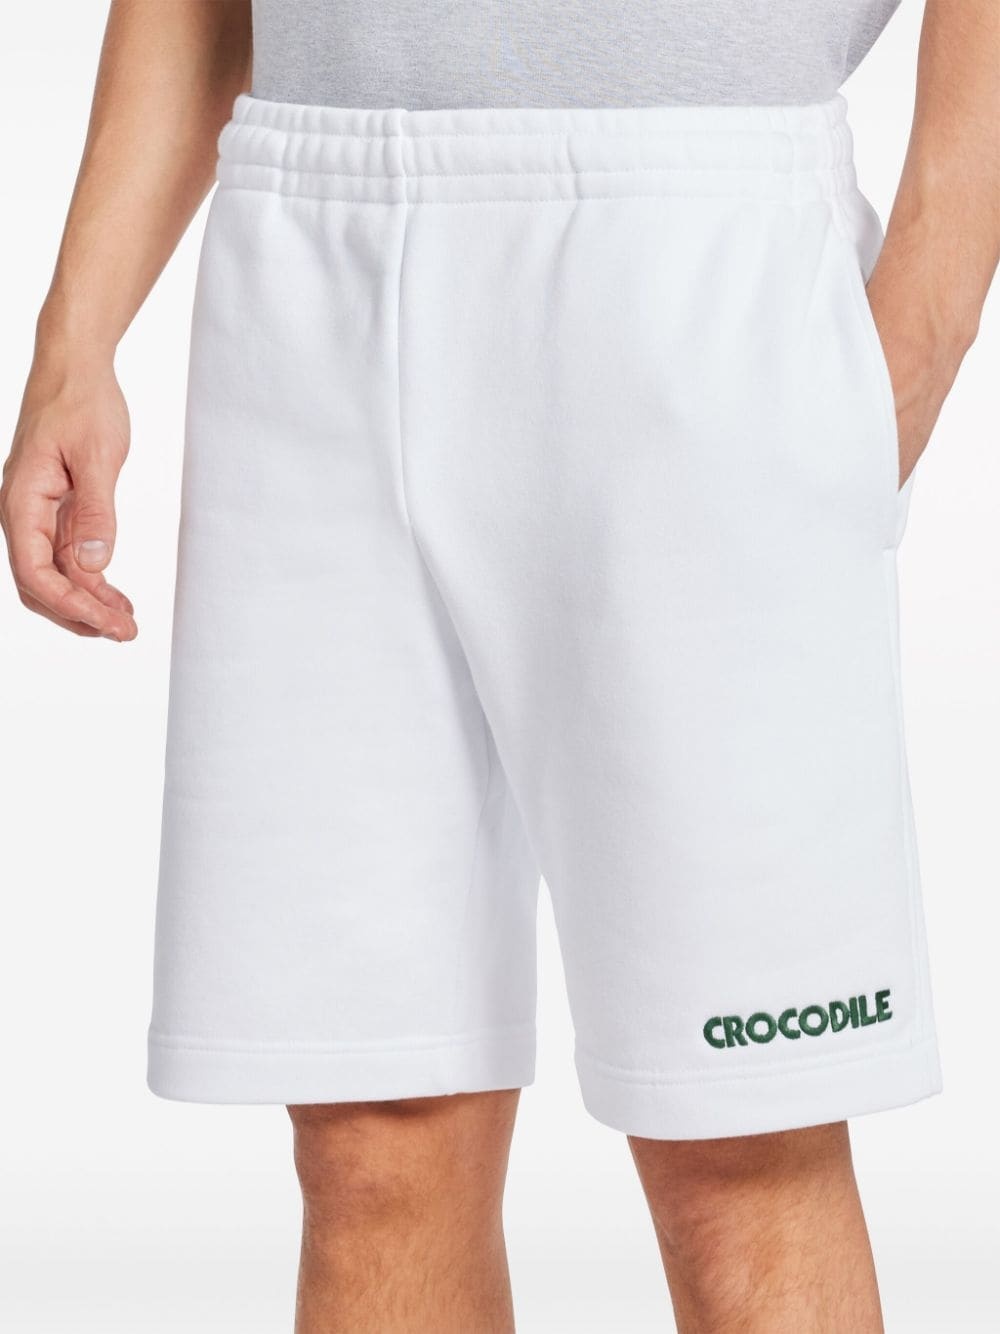 slogan-embroidered cotton track shorts - 5